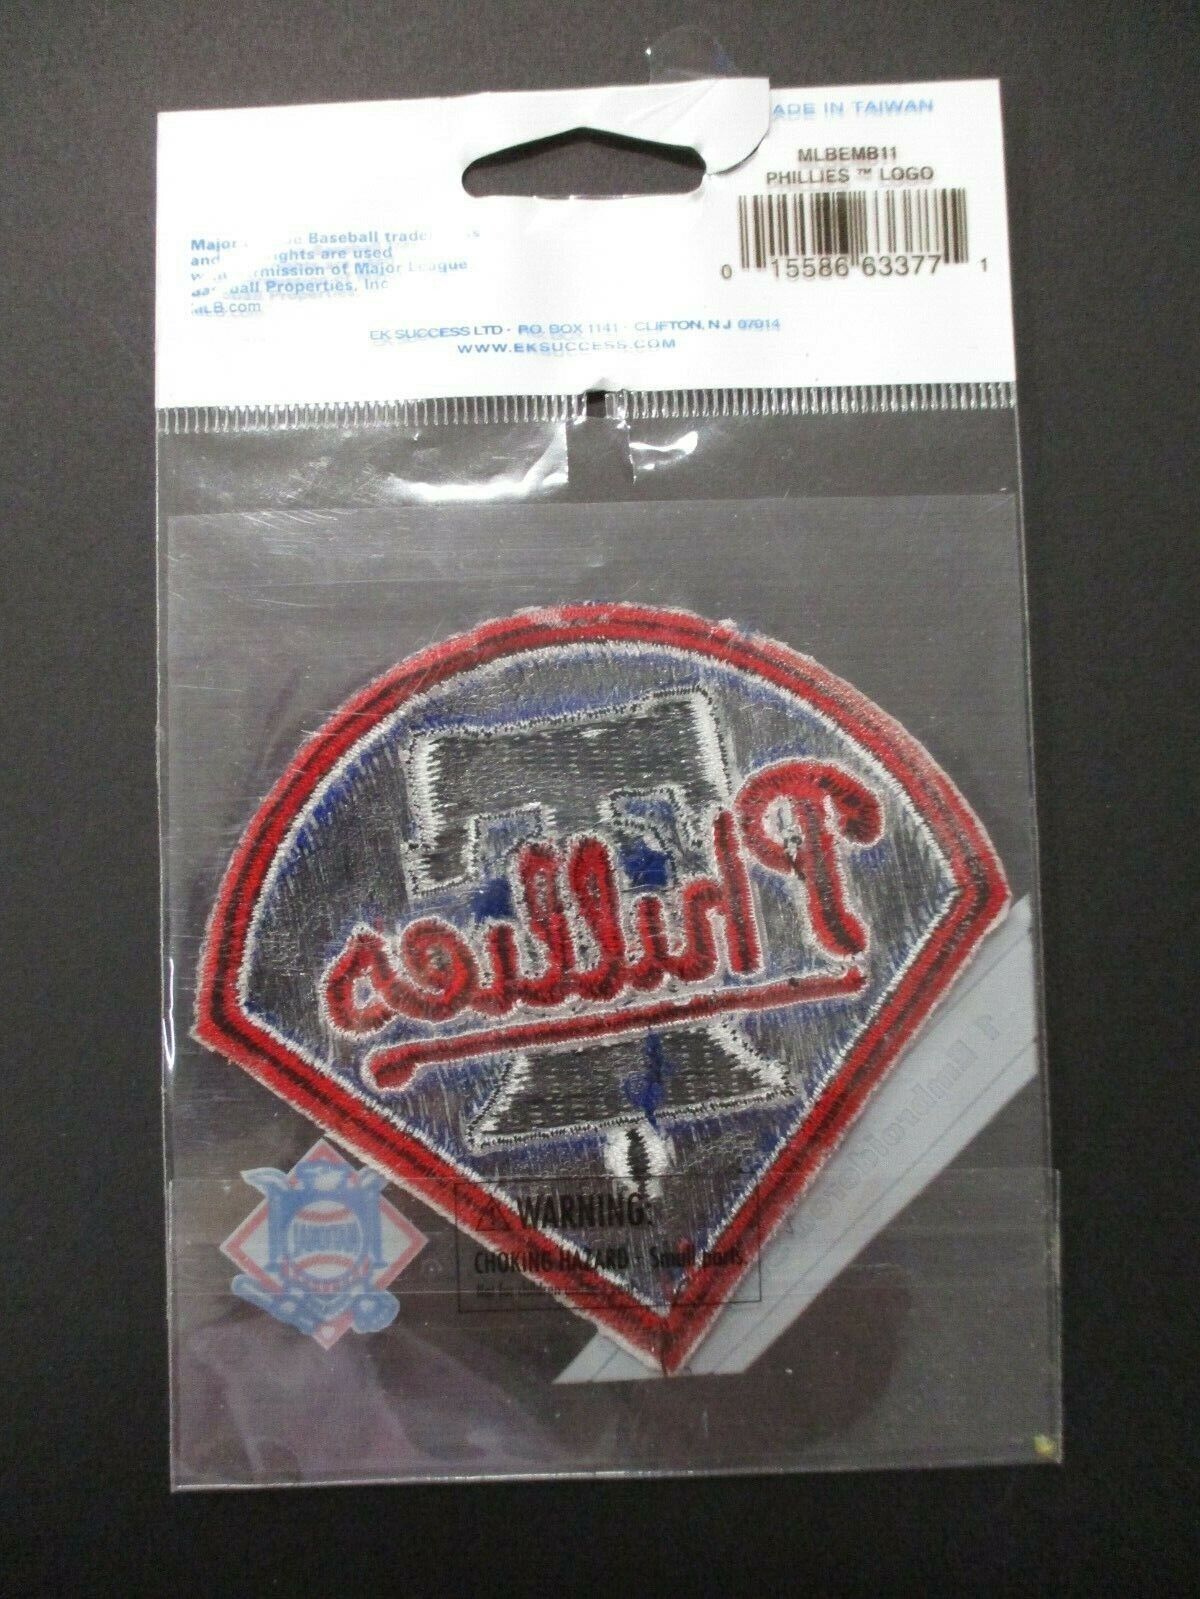 Philadelphia Phillies patch size 3.25 x 3.25 inches in excellent condition